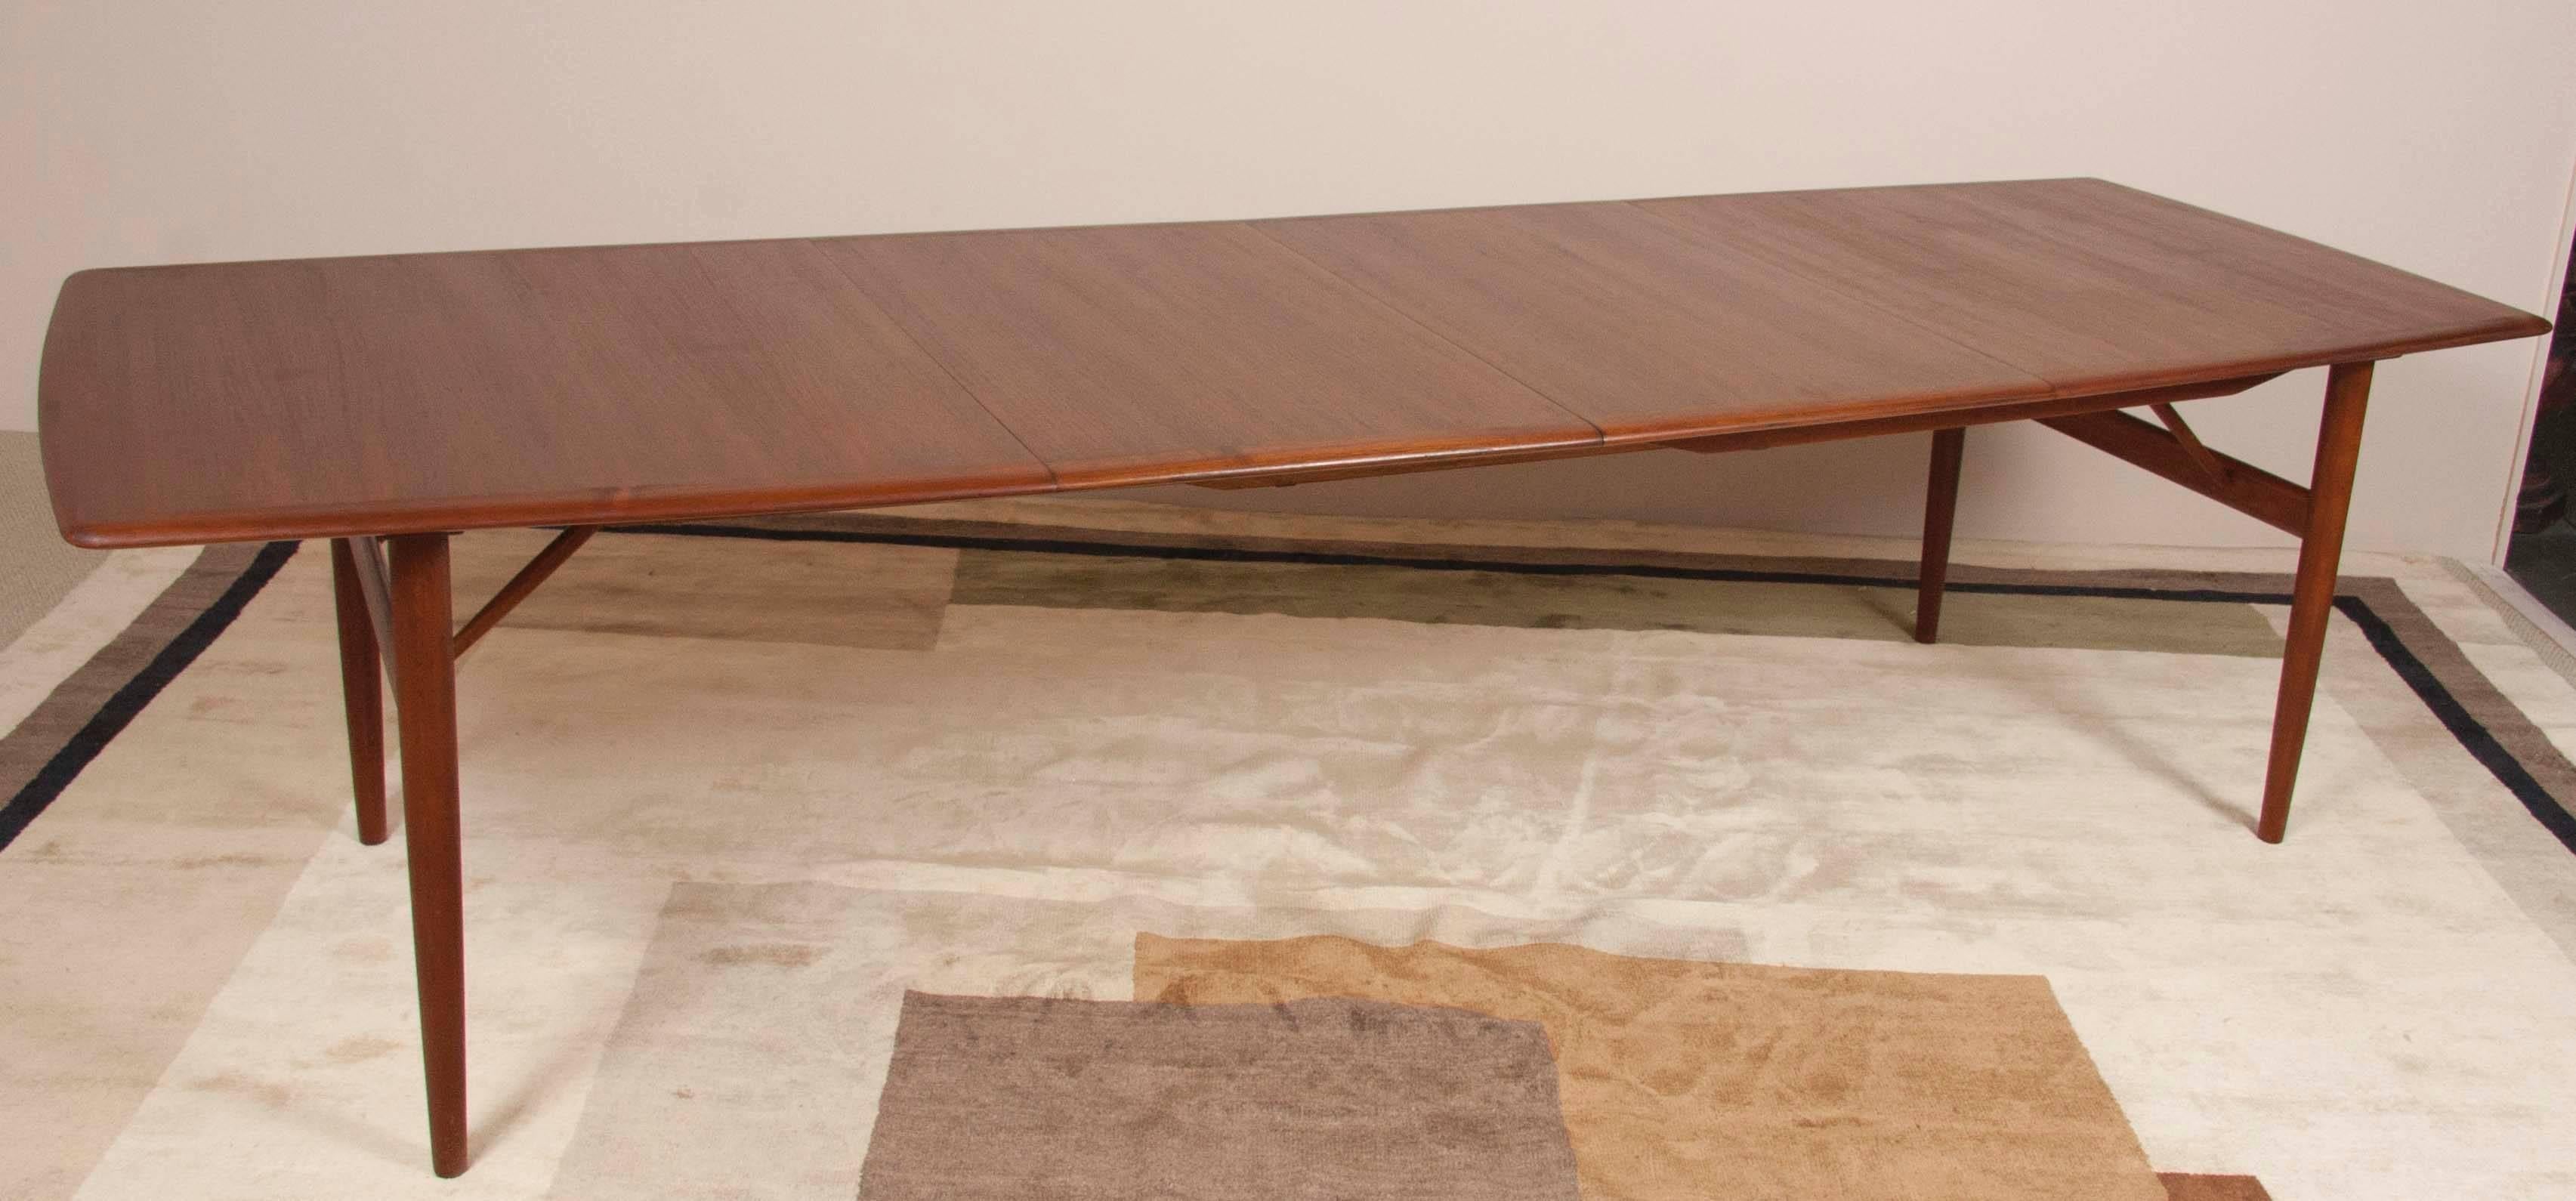 A Povl Dinesen model PD 700 Teak dining table with great support stretchers. This table has two 23 1/2 inch leaves. The total length of the table with leaves is 118 inches.
 